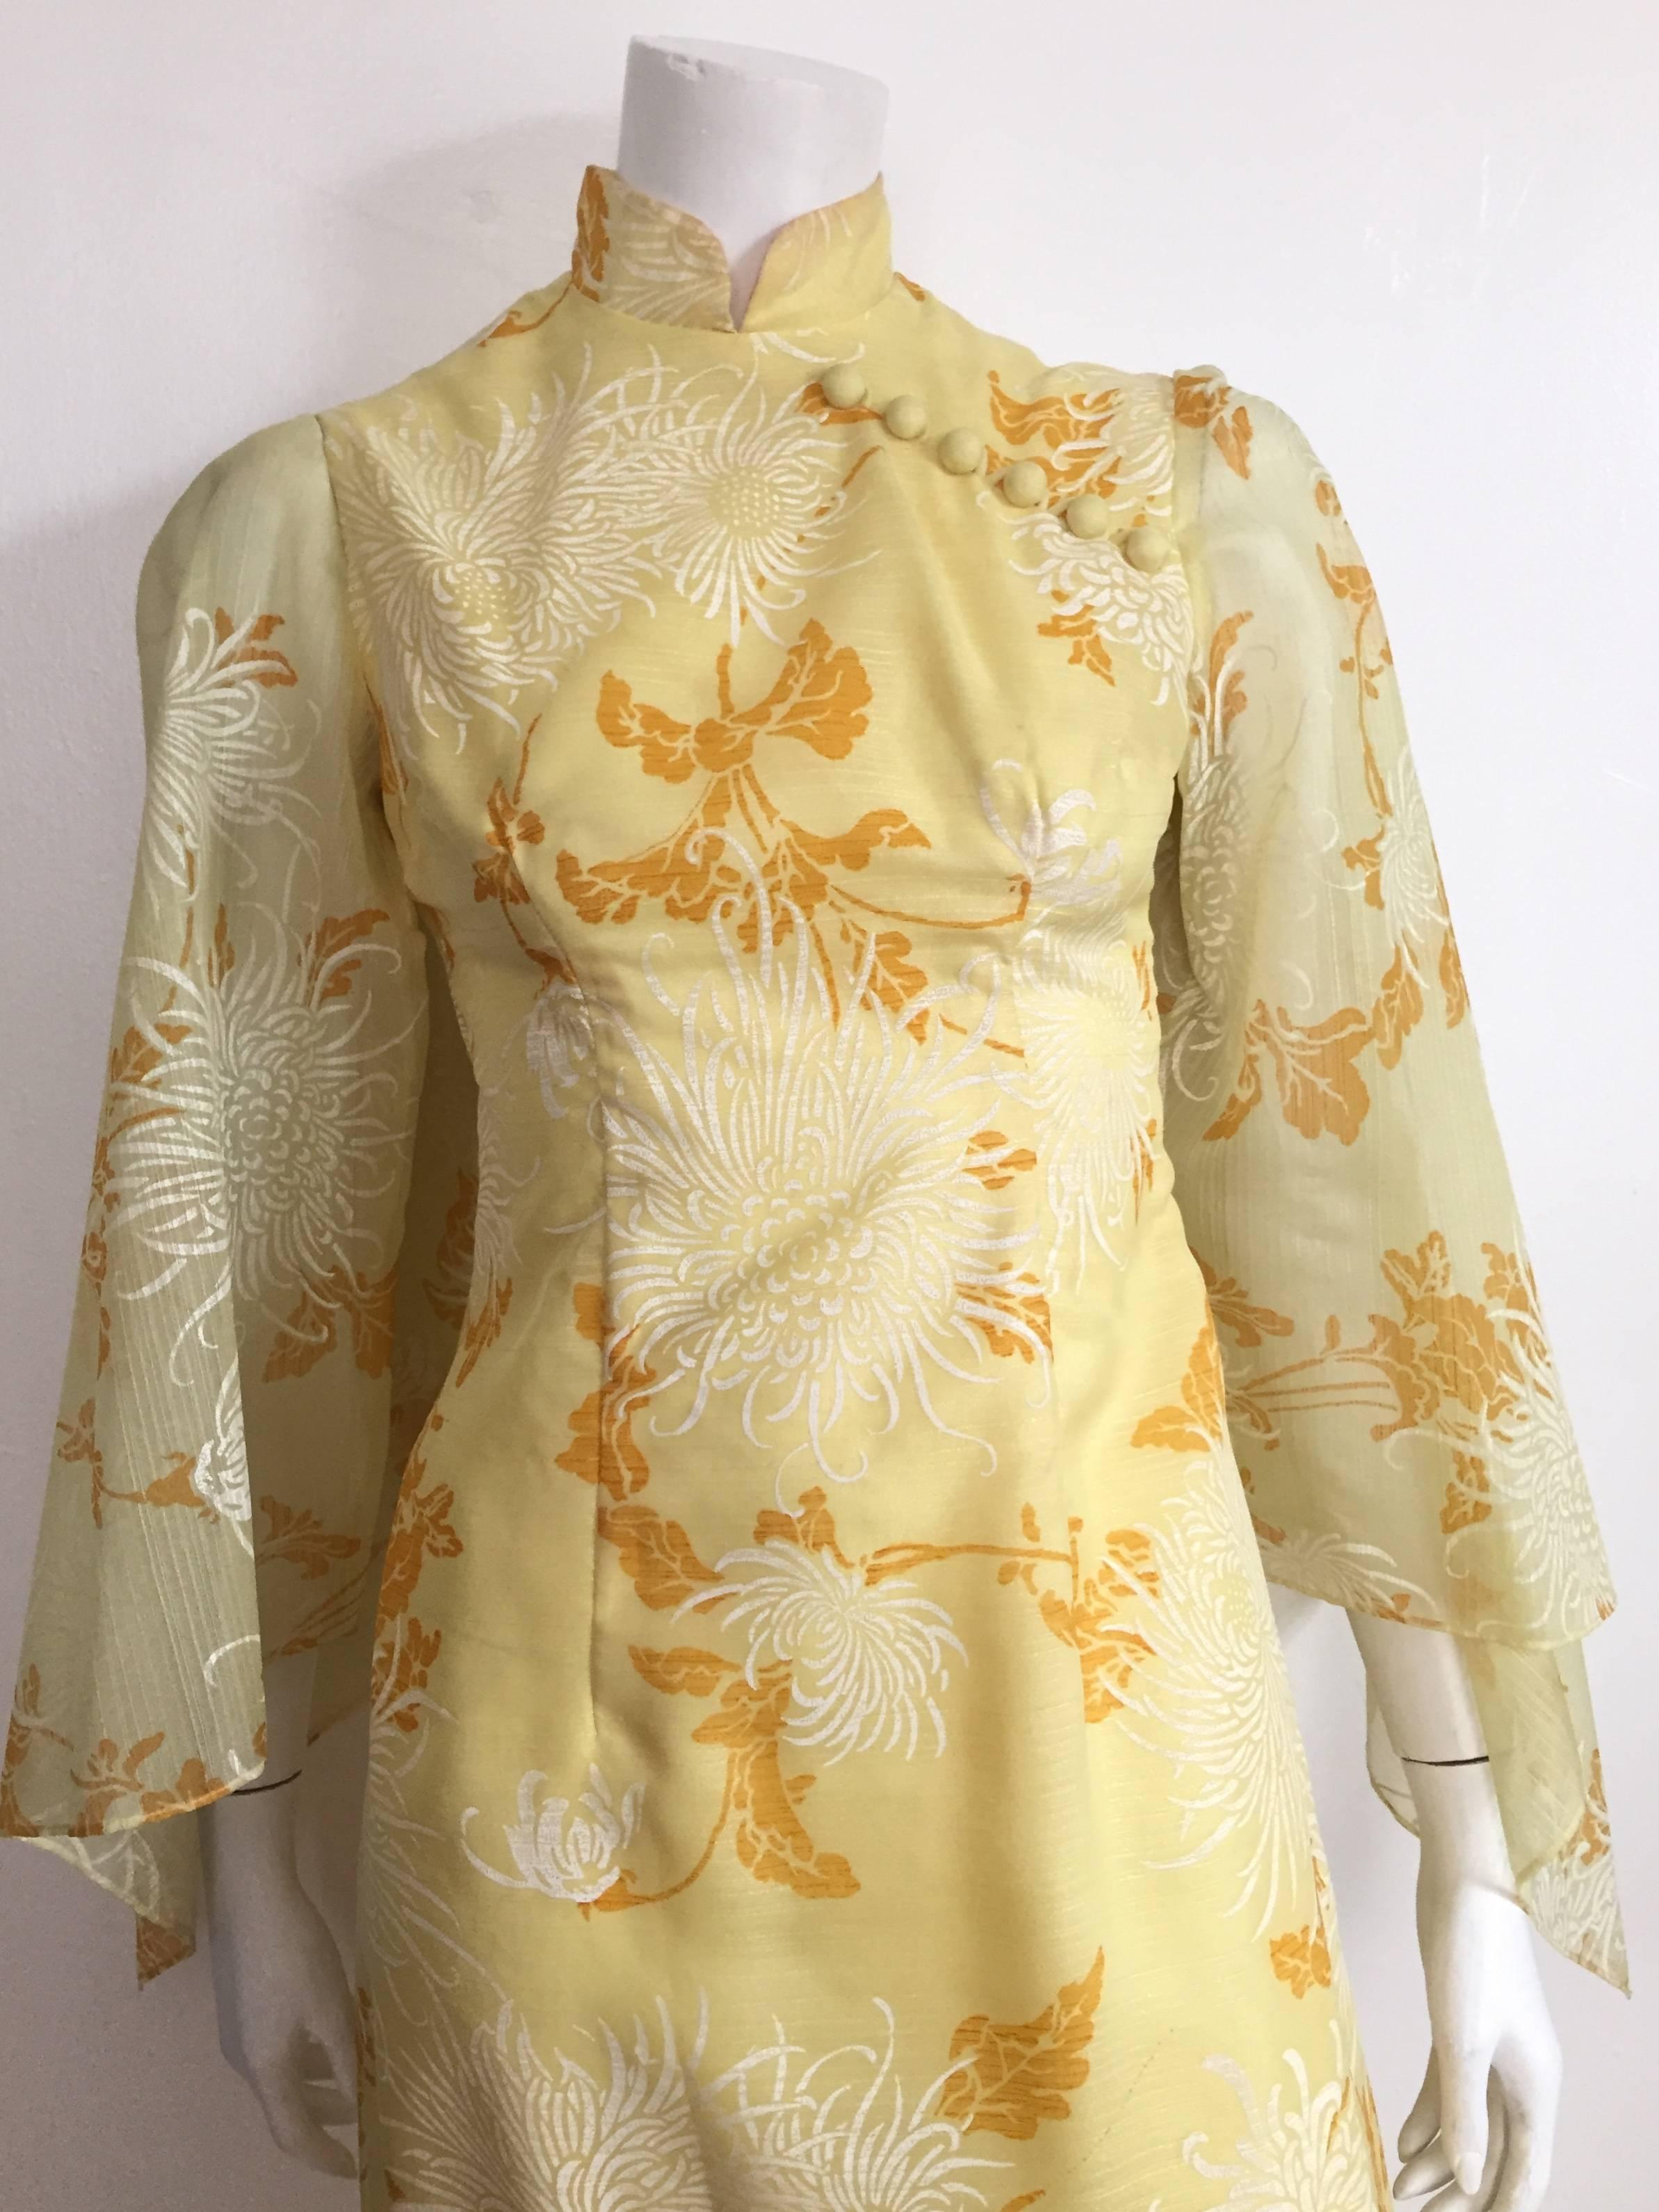 Alfred Shaheen 1970s yellow floral maxi gown is a size 4. 
Flowing handkerchief sleeves. This red carpet ready gown will turn heads in your direction. 
Measurements are:
 32" bust
27" waist
31" hips
30" sleeves
25.5" flat